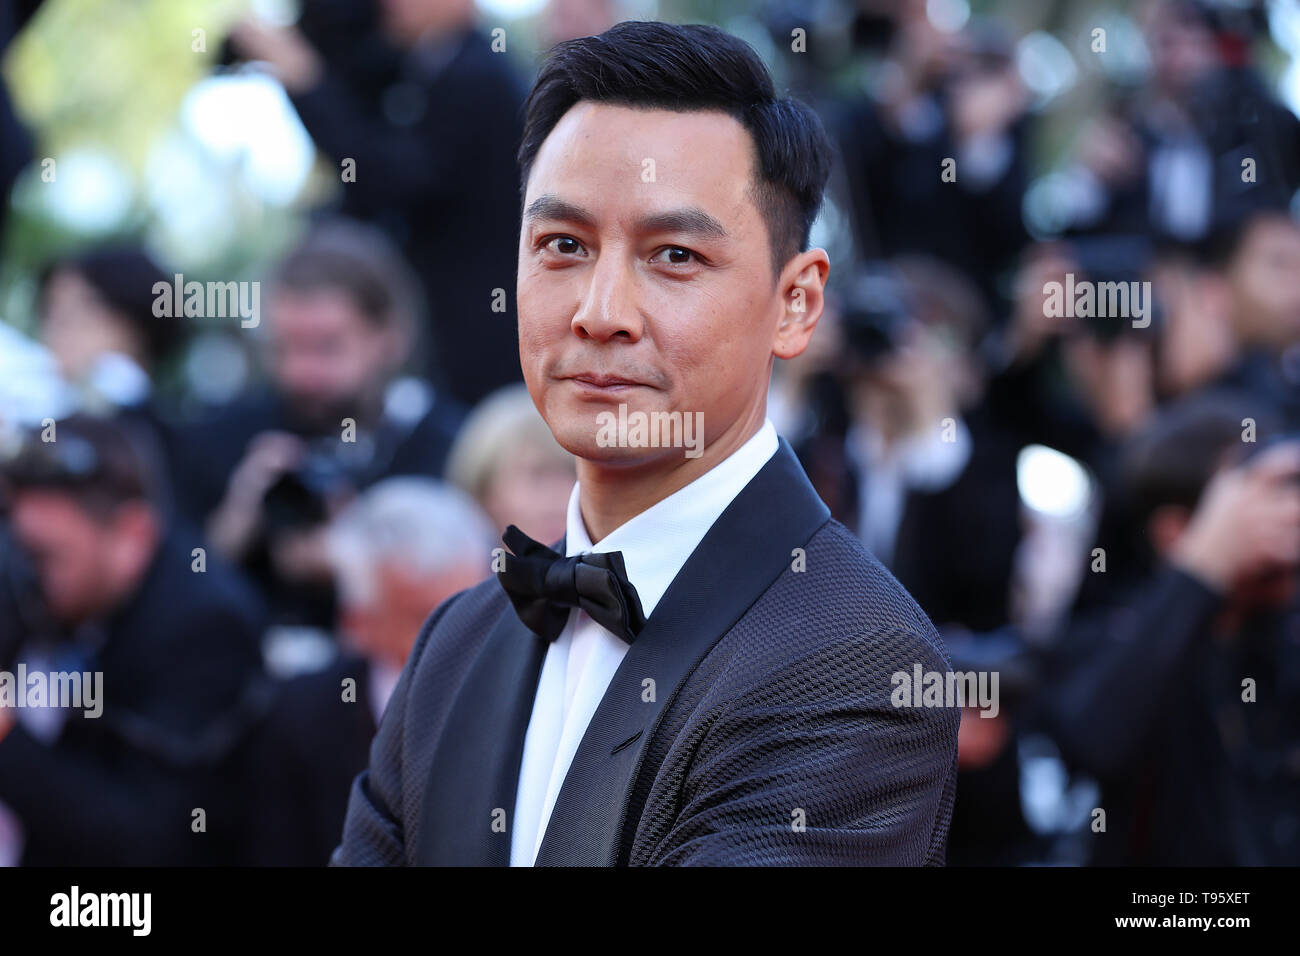 Cannes, France. 16th May, 2019. Actor Daniel Wu poses on the red carpet for the premiere of the film 'Rocketman' at the 72nd Cannes Film Festival in Cannes, France, on May 16, 2019. The 72nd Cannes Film Festival is held here from May 14 to 25. Credit: Zhang Cheng/Xinhua/Alamy Live News Stock Photo